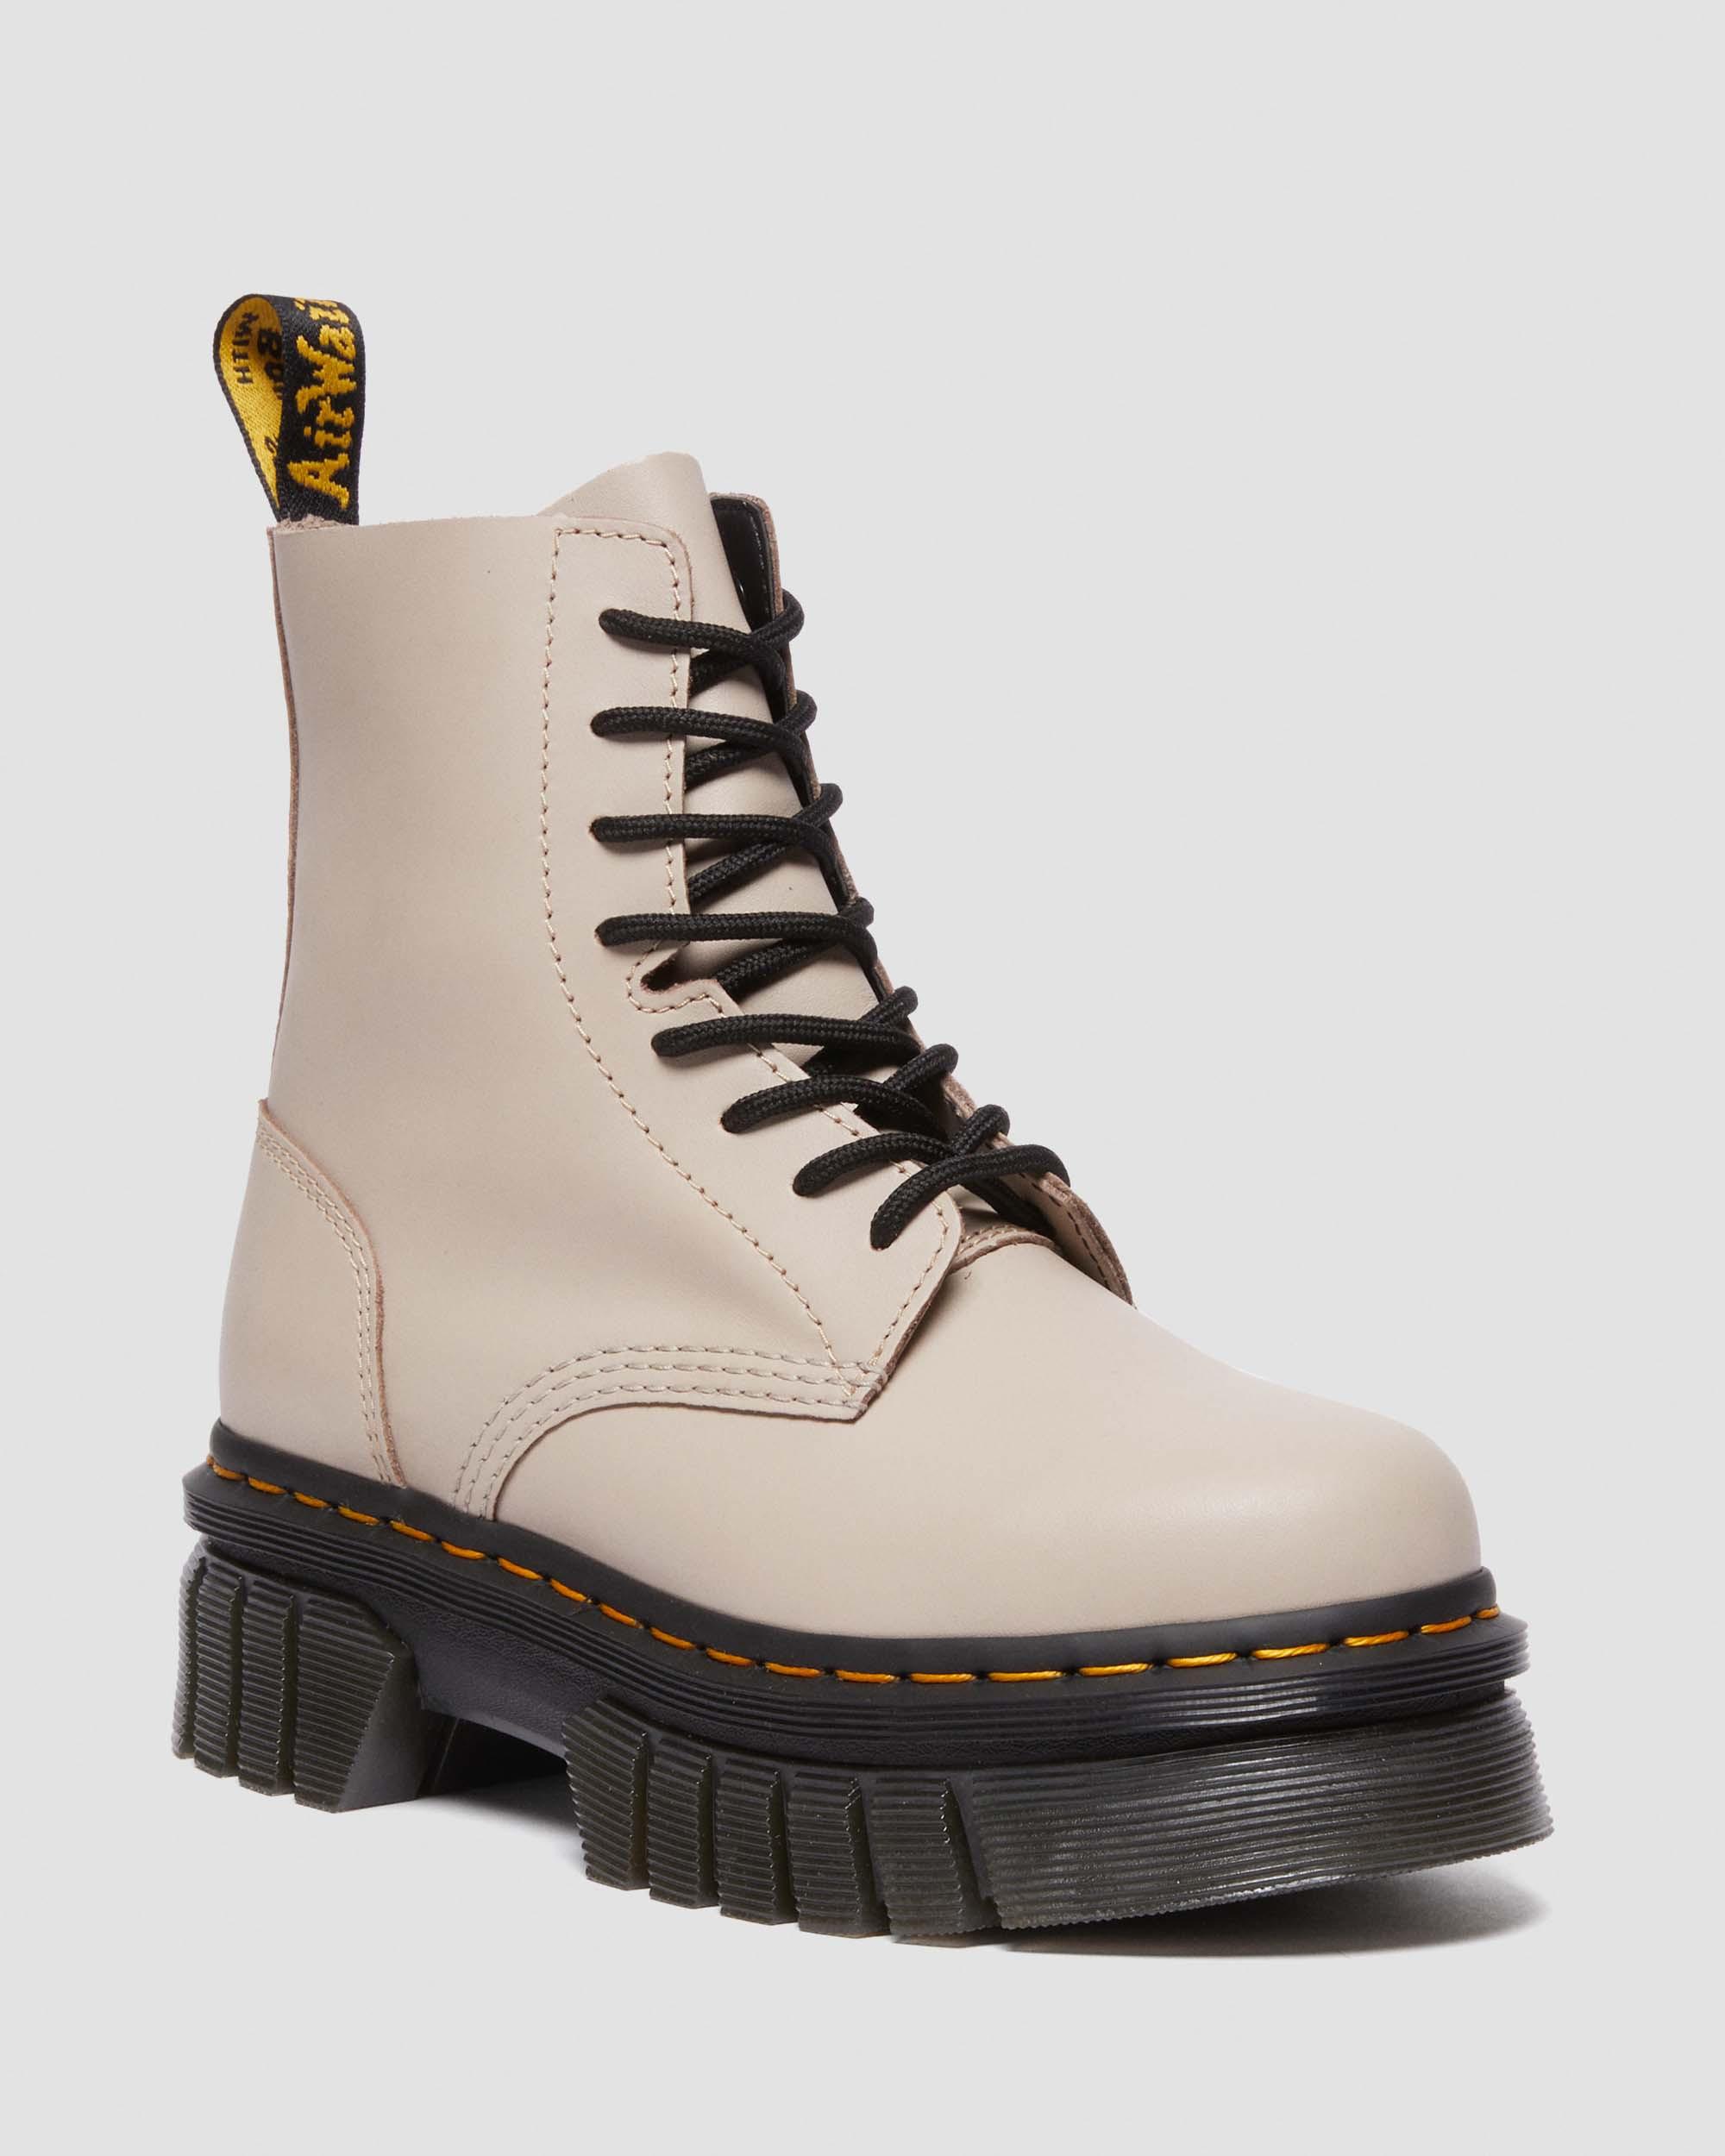 Audrick Nappa Lux Platform Ankle Boots in Vintage Taupe | Dr. Martens